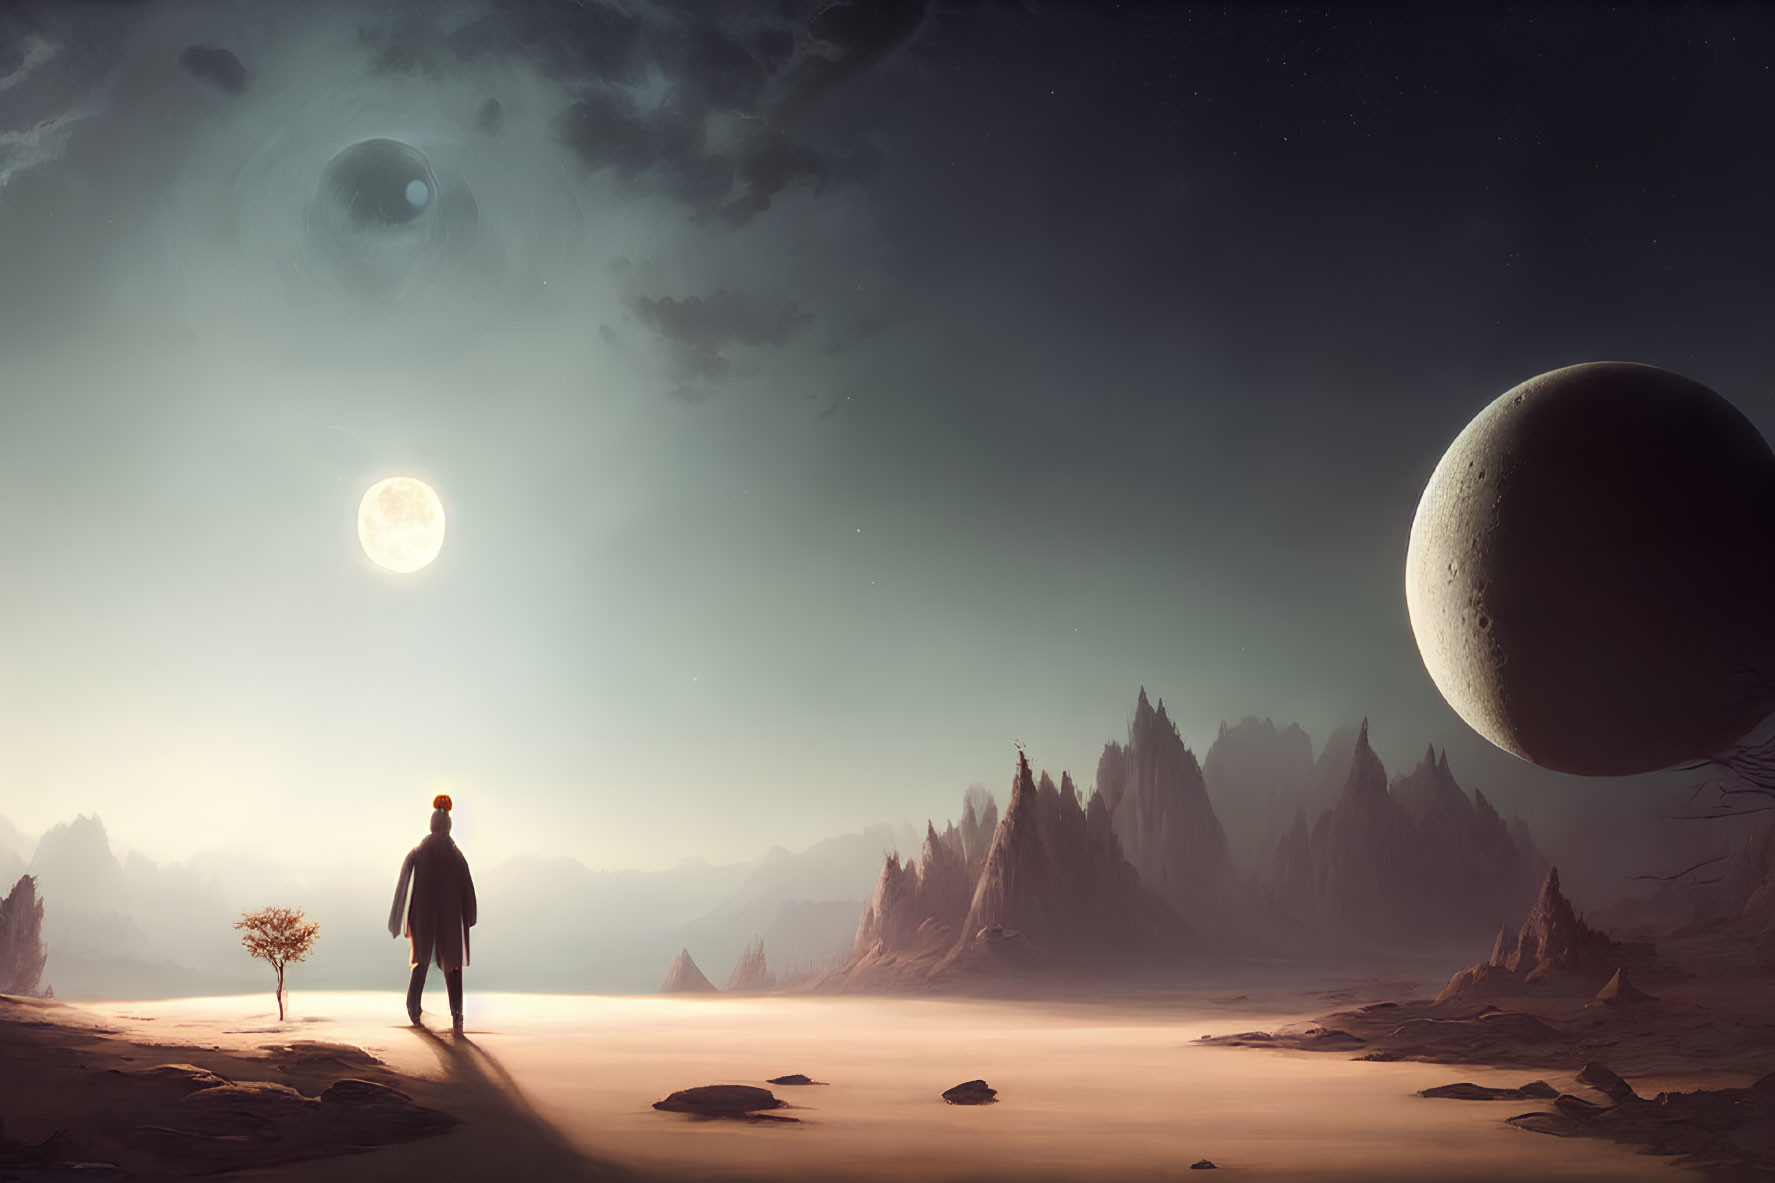 Lone figure in desert landscape with two moons, lone tree, and towering peaks